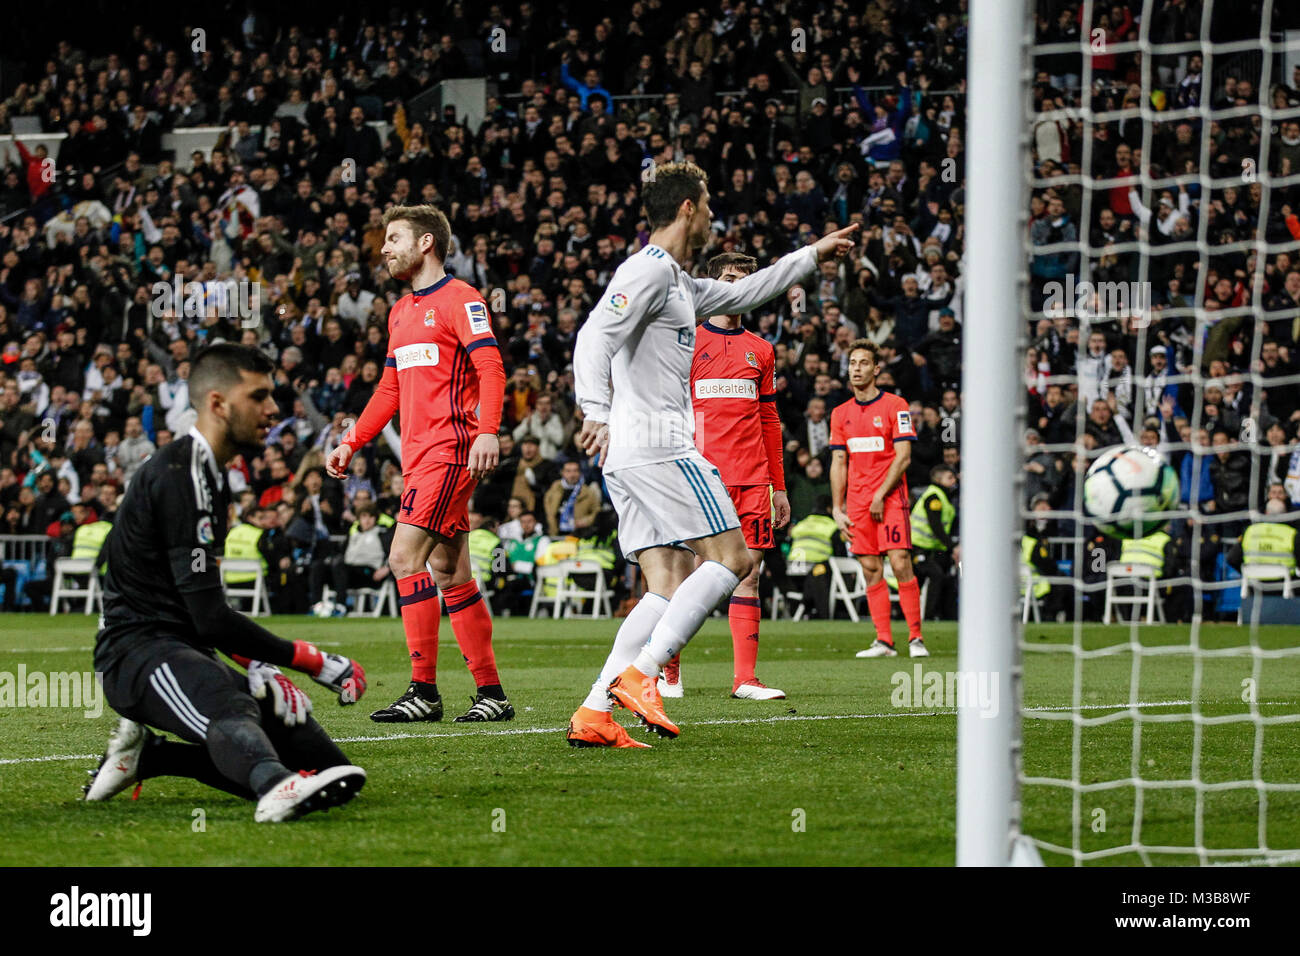 Cristiano Ronaldo (Real Madrid) celebrates his goal which made it (2, 0) La Liga match between Real Madrid vs Real Sociedad at the Santiago Bernabeu stadium in Madrid, Spain, February 10, 2018. Credit: Gtres Información más Comuniación on line, S.L./Alamy Live News Stock Photo